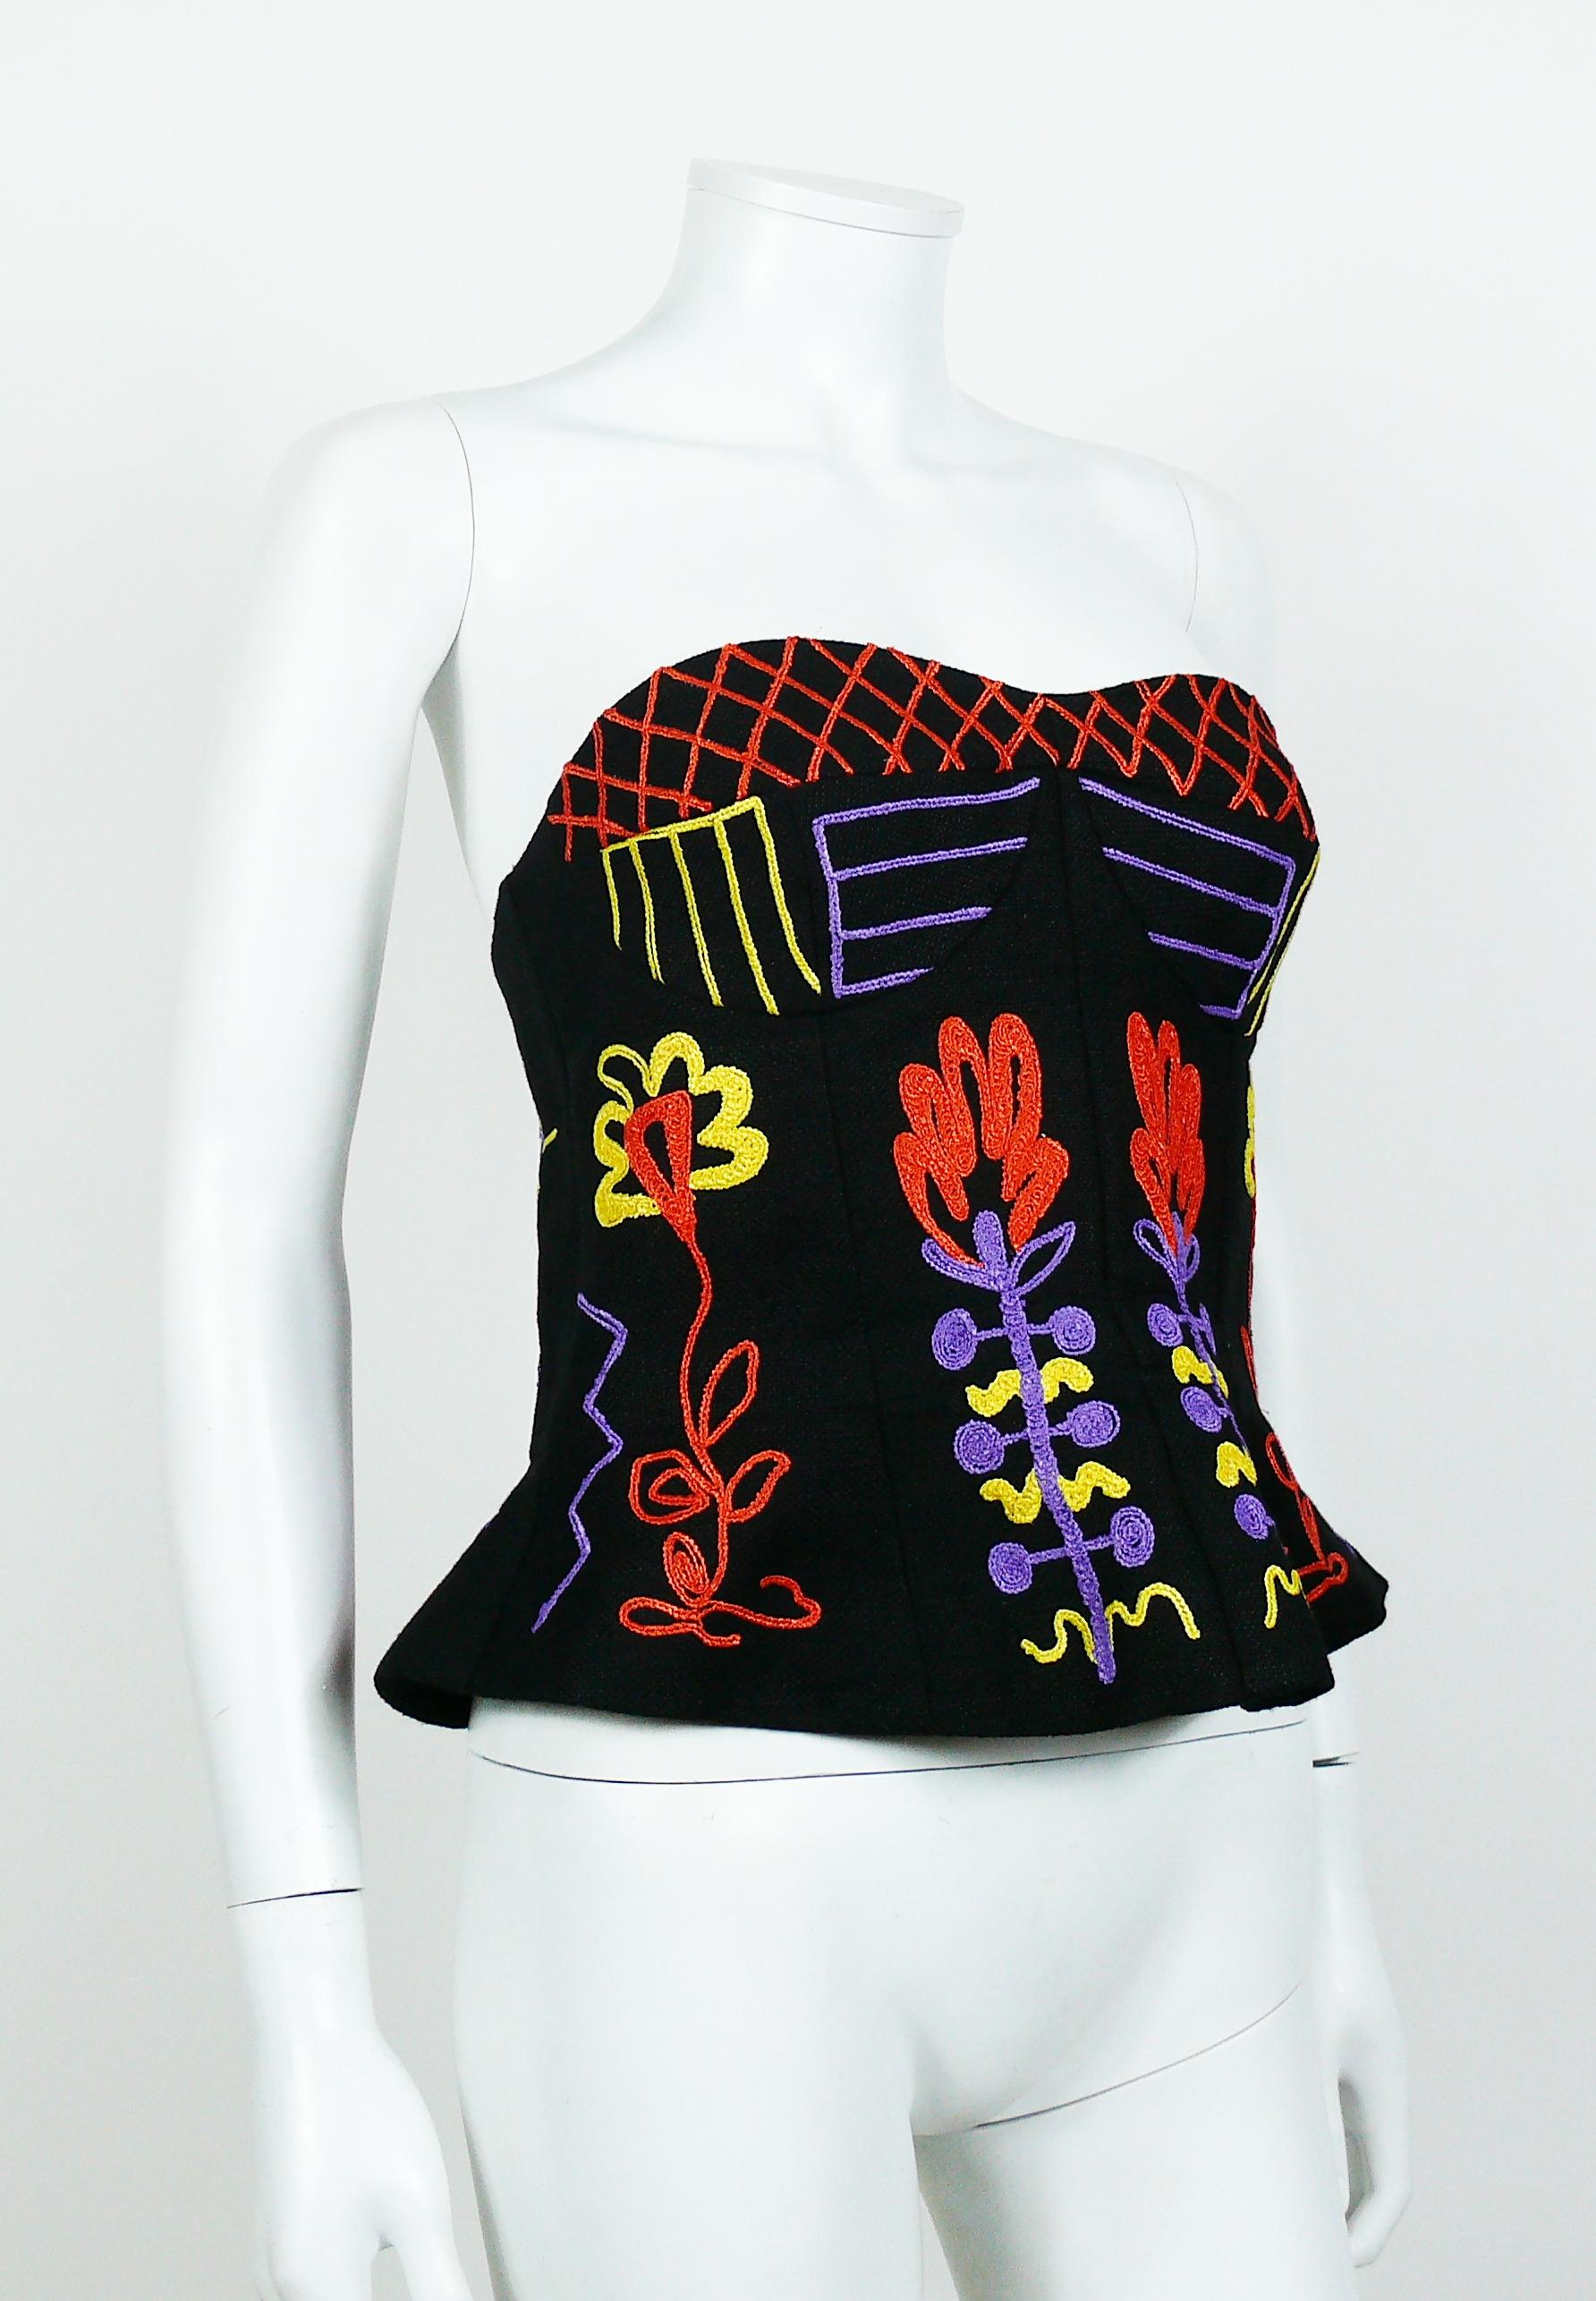 CHRISTIAN LACROIX vintage 1990s black linen bustier top featuring multicolored abstract floral embroideries.

Label reads CHRISTIAN LACROIX Paris.
Made in France.

Size tag reads : 44.
Please refer to measurements.

Composition tag reads : 80 %